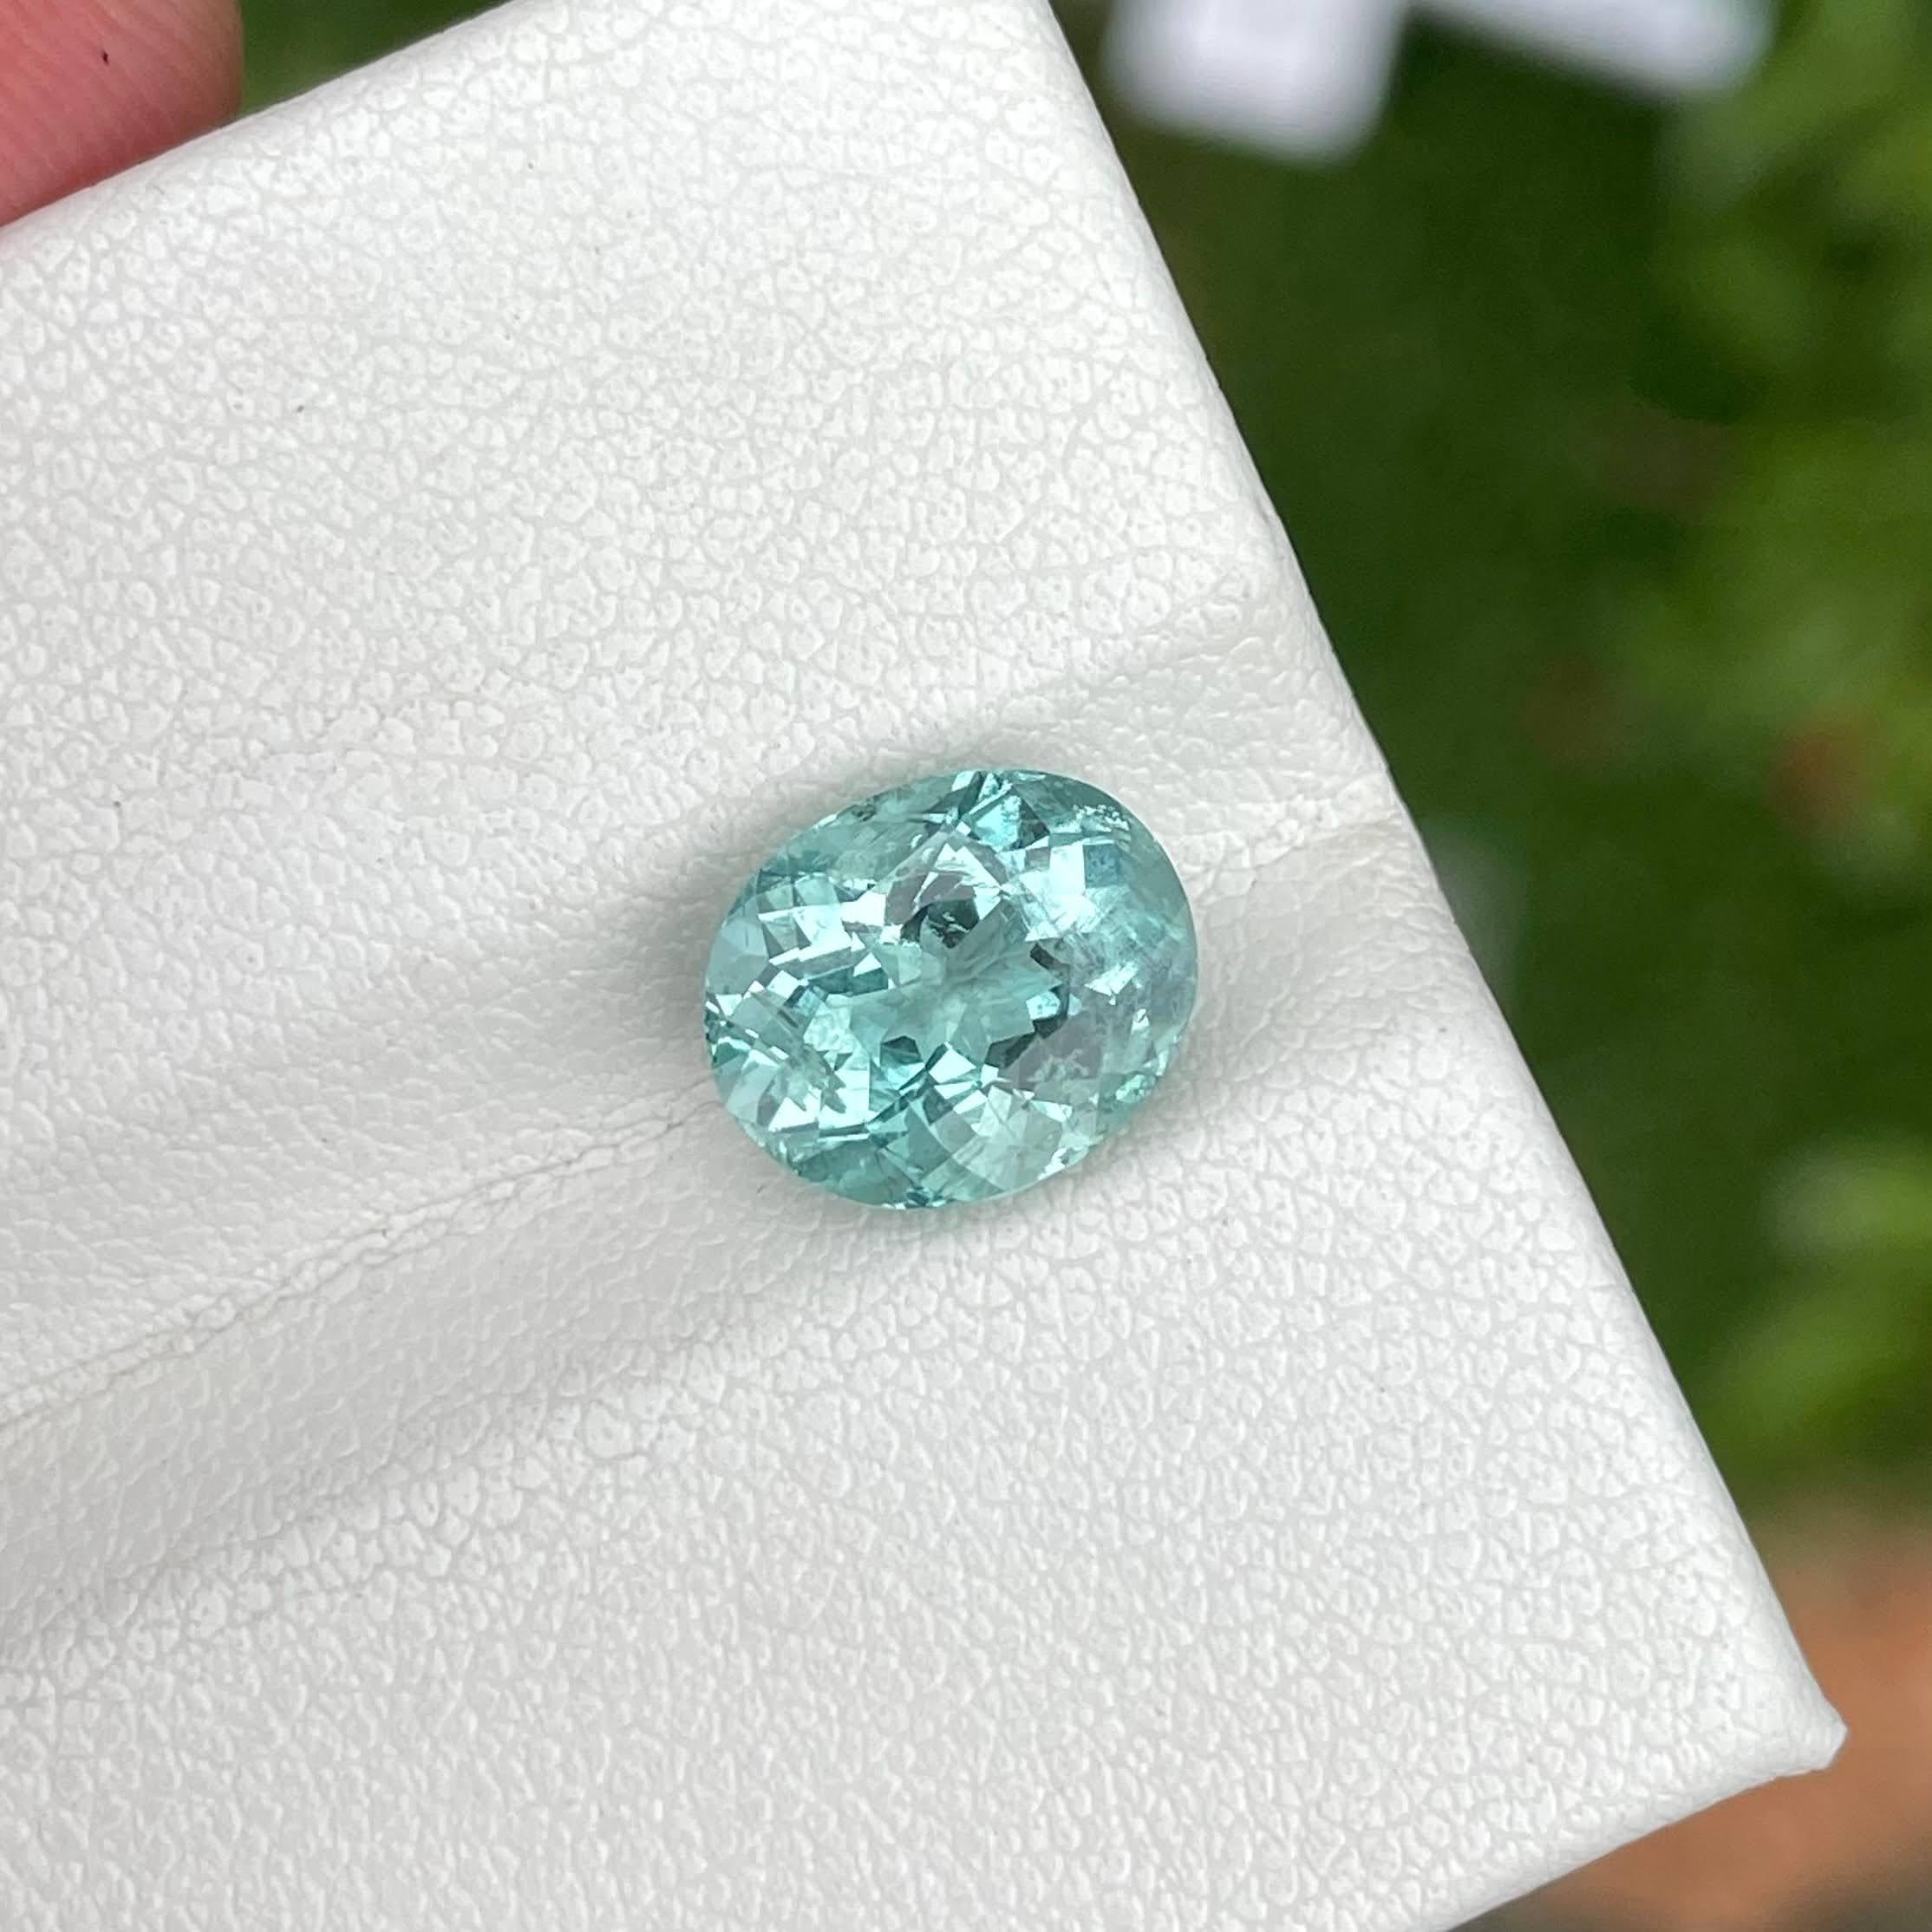 Video is available
Weight 2.60 carats 
Dimensions 9.6x8.1x6.0 mm
Treatment none 
Origin Nigeria 
Clarity Vvs 
Shape oval 
Cut faceted 



Crafted from the depths of nature's treasure troves, this 2.60 carats Deep Blue Aquamarine Oval Cut gemstone